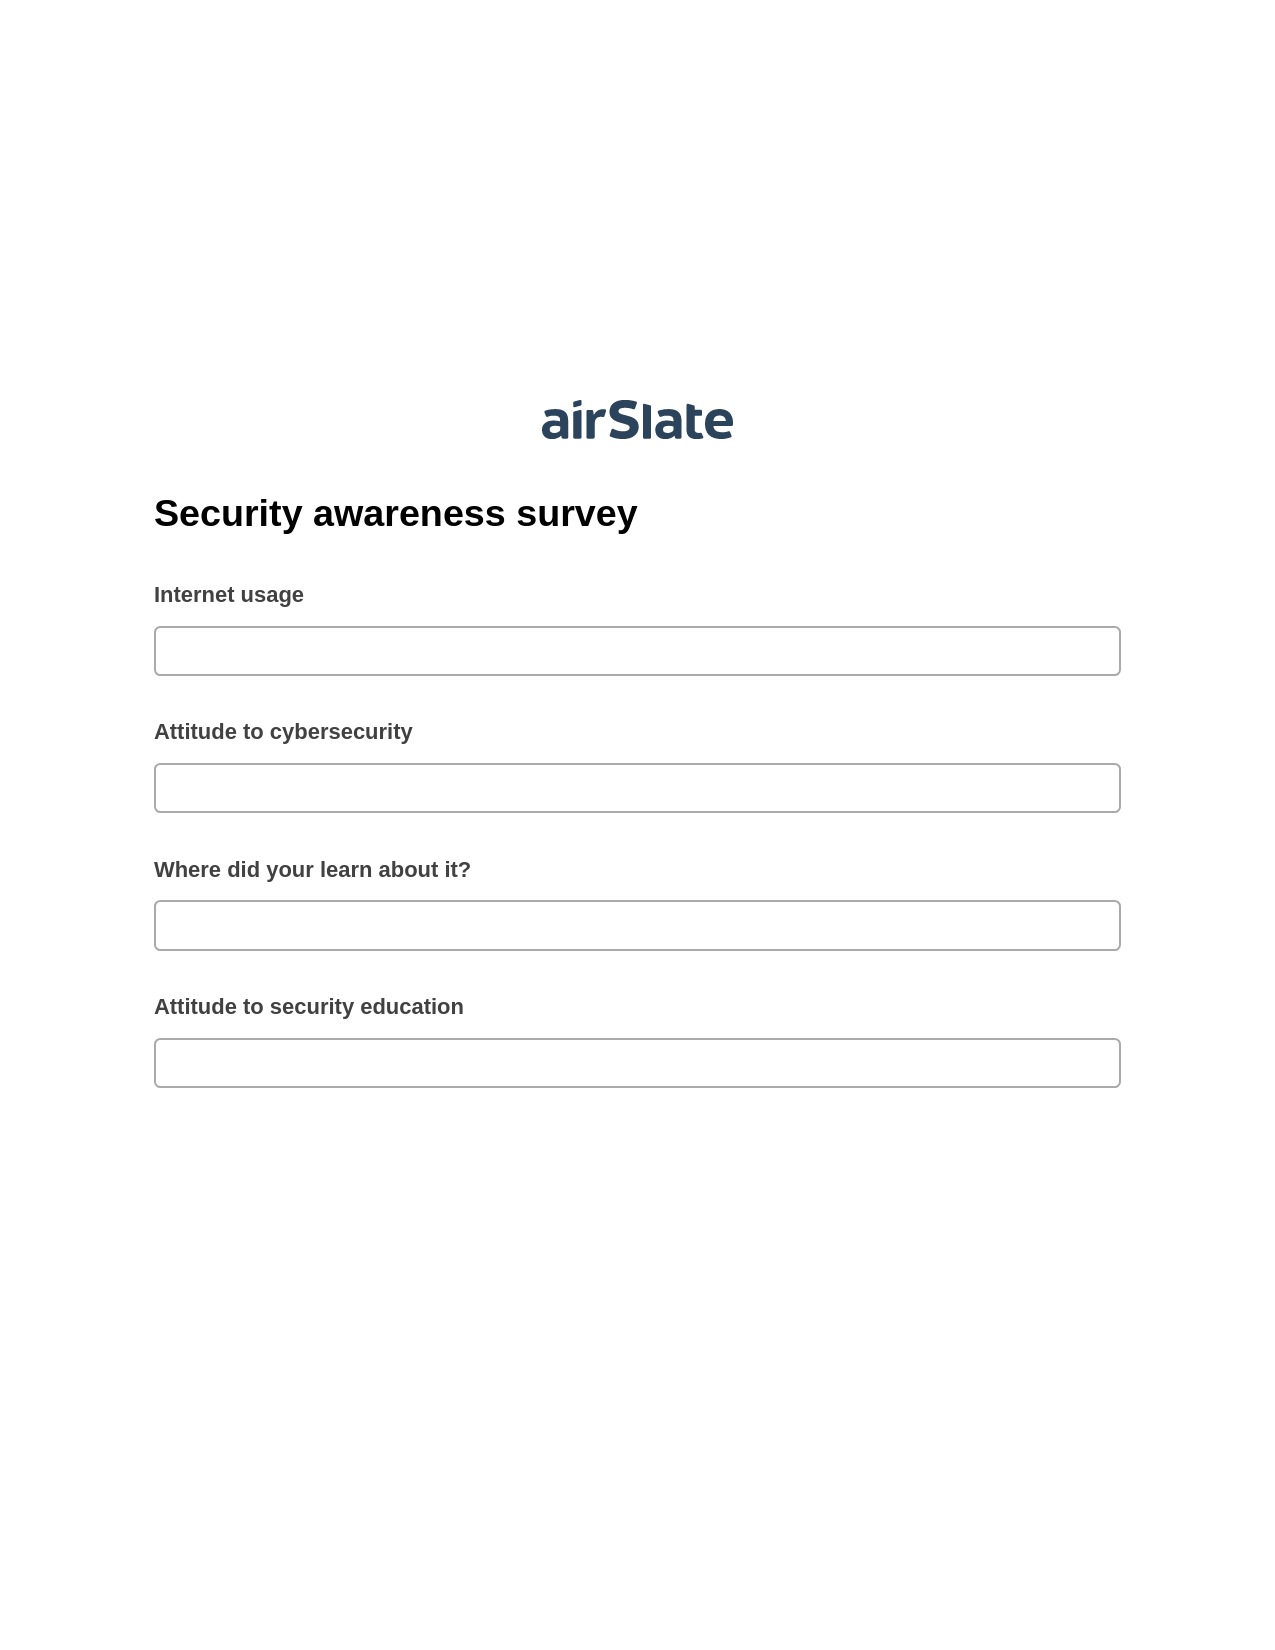 Security awareness survey Pre-fill from CSV File Dropdown Options Bot, Invoke Salesforce Process Bot, Export to Smartsheet